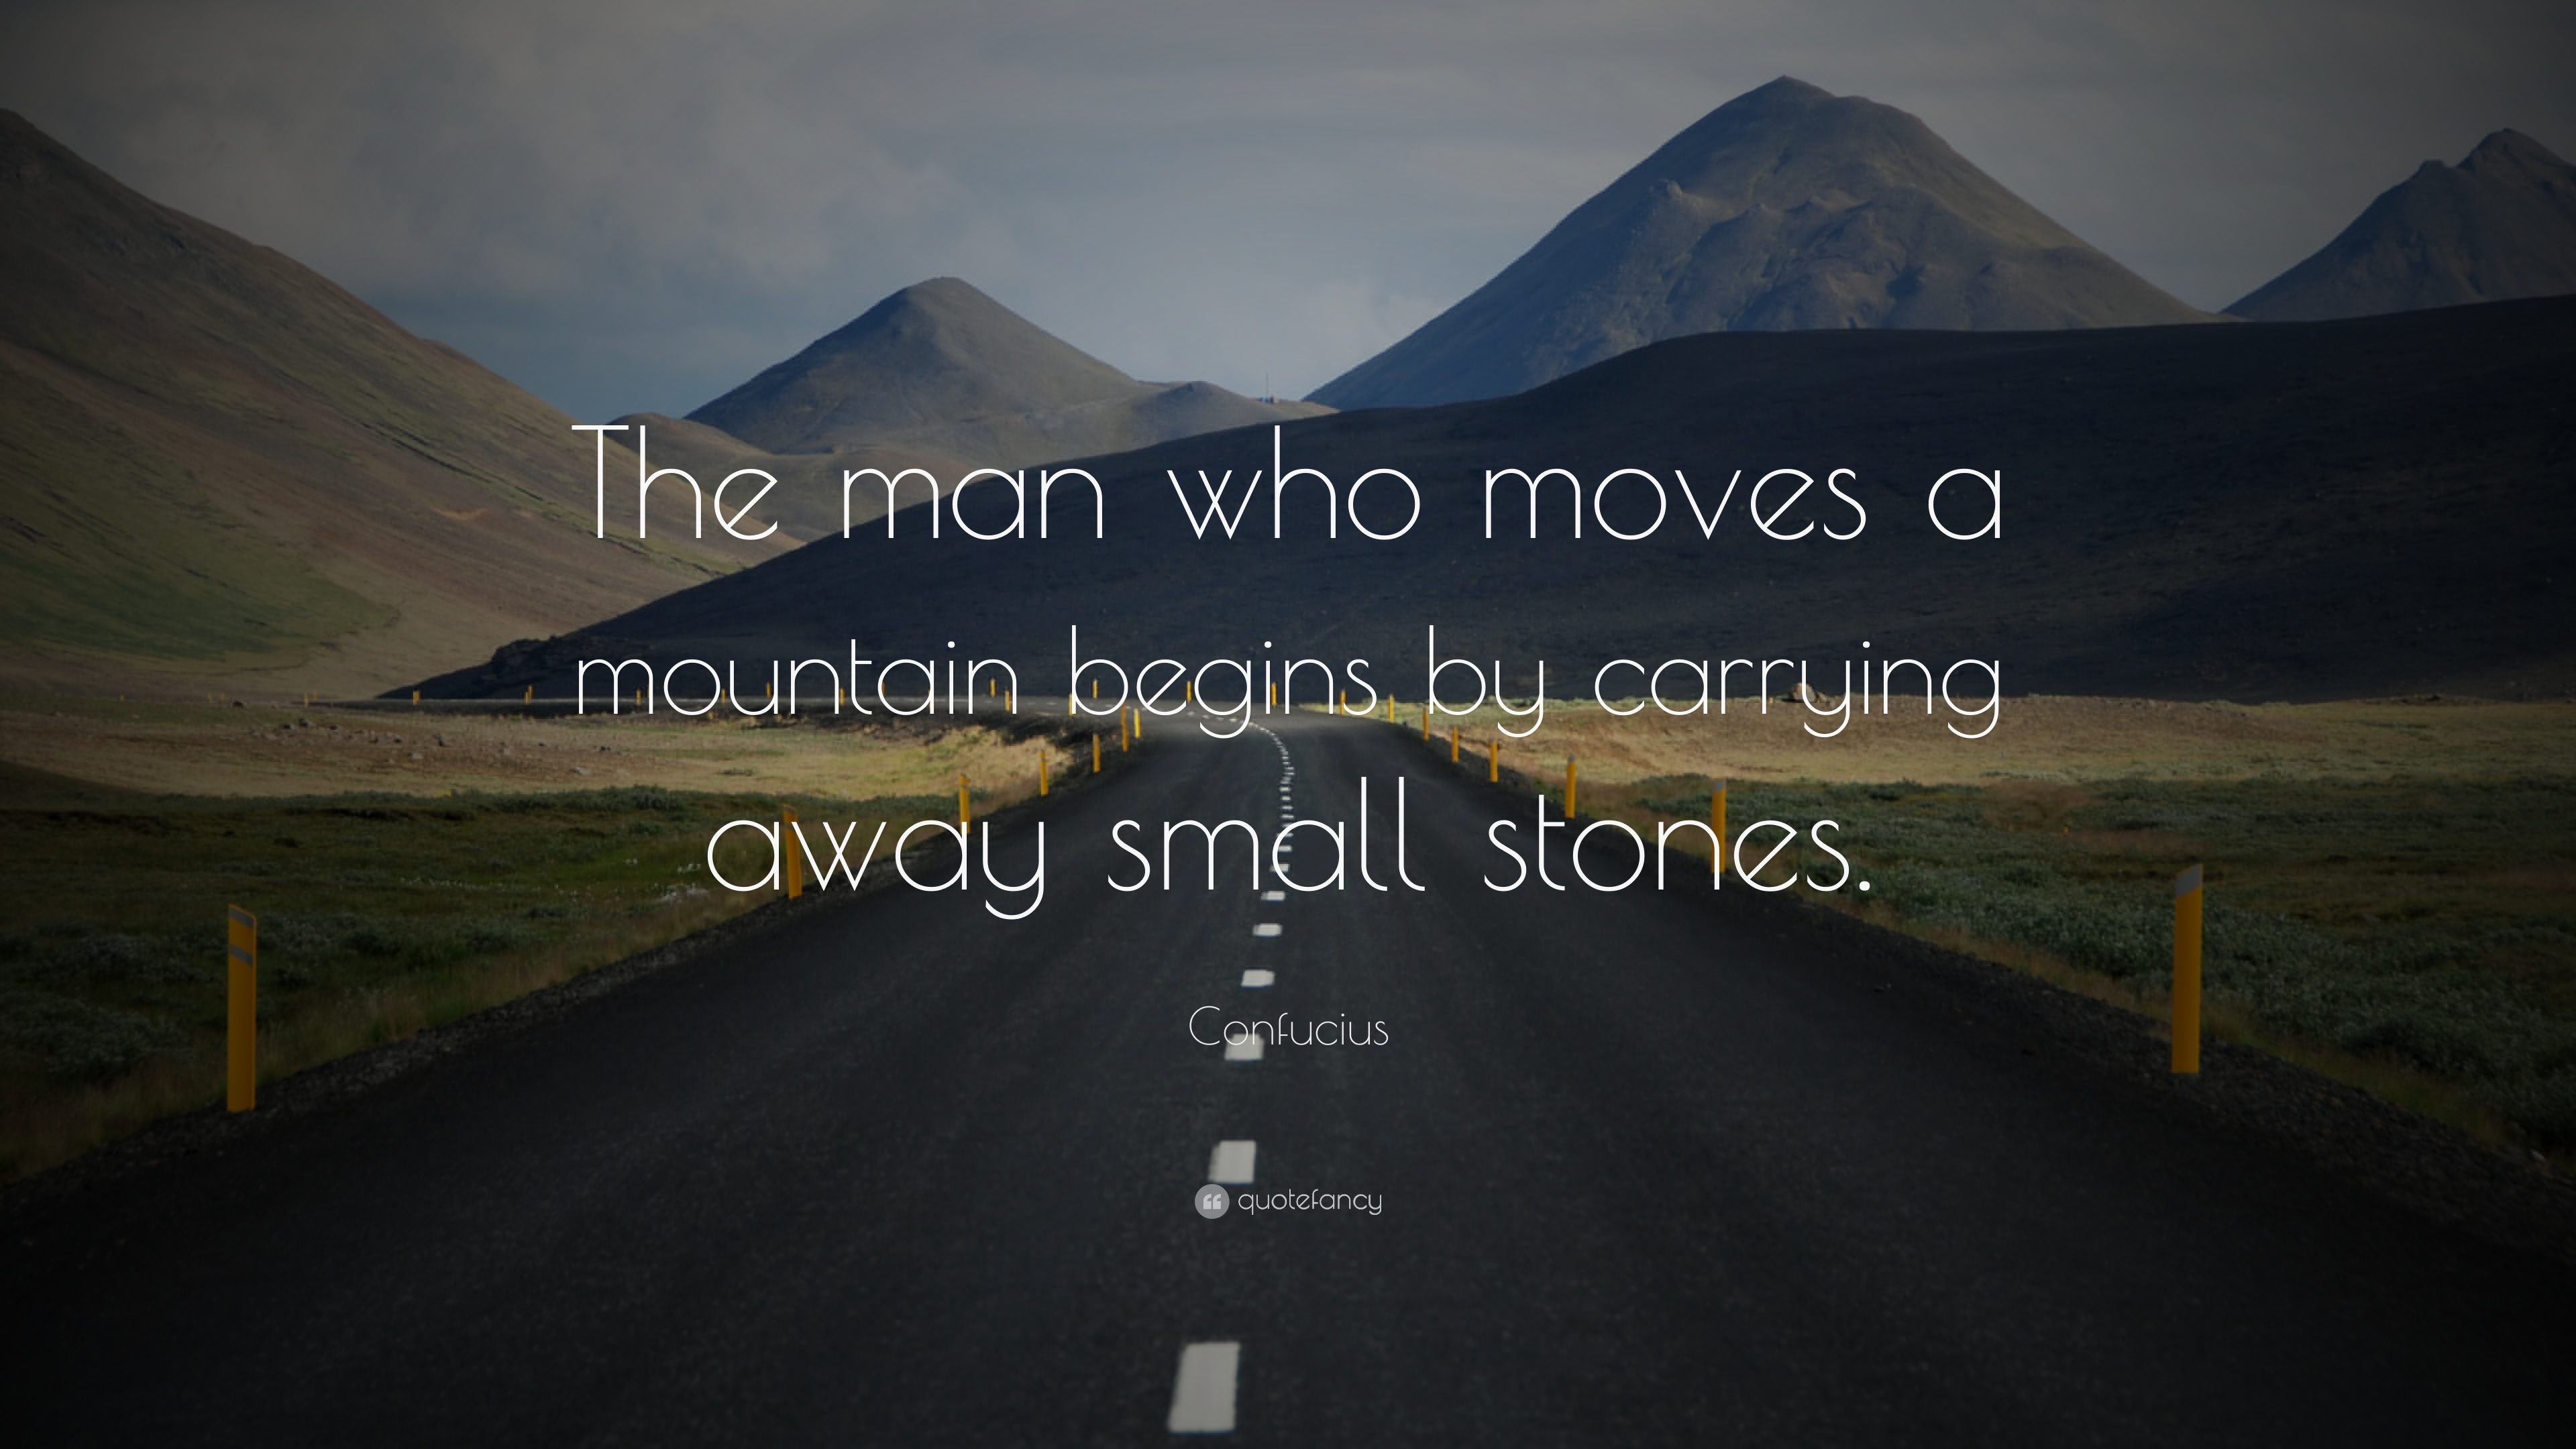 2804-Confucius-Quote-The-man-who-moves-a-mountain-begins-by-carrying